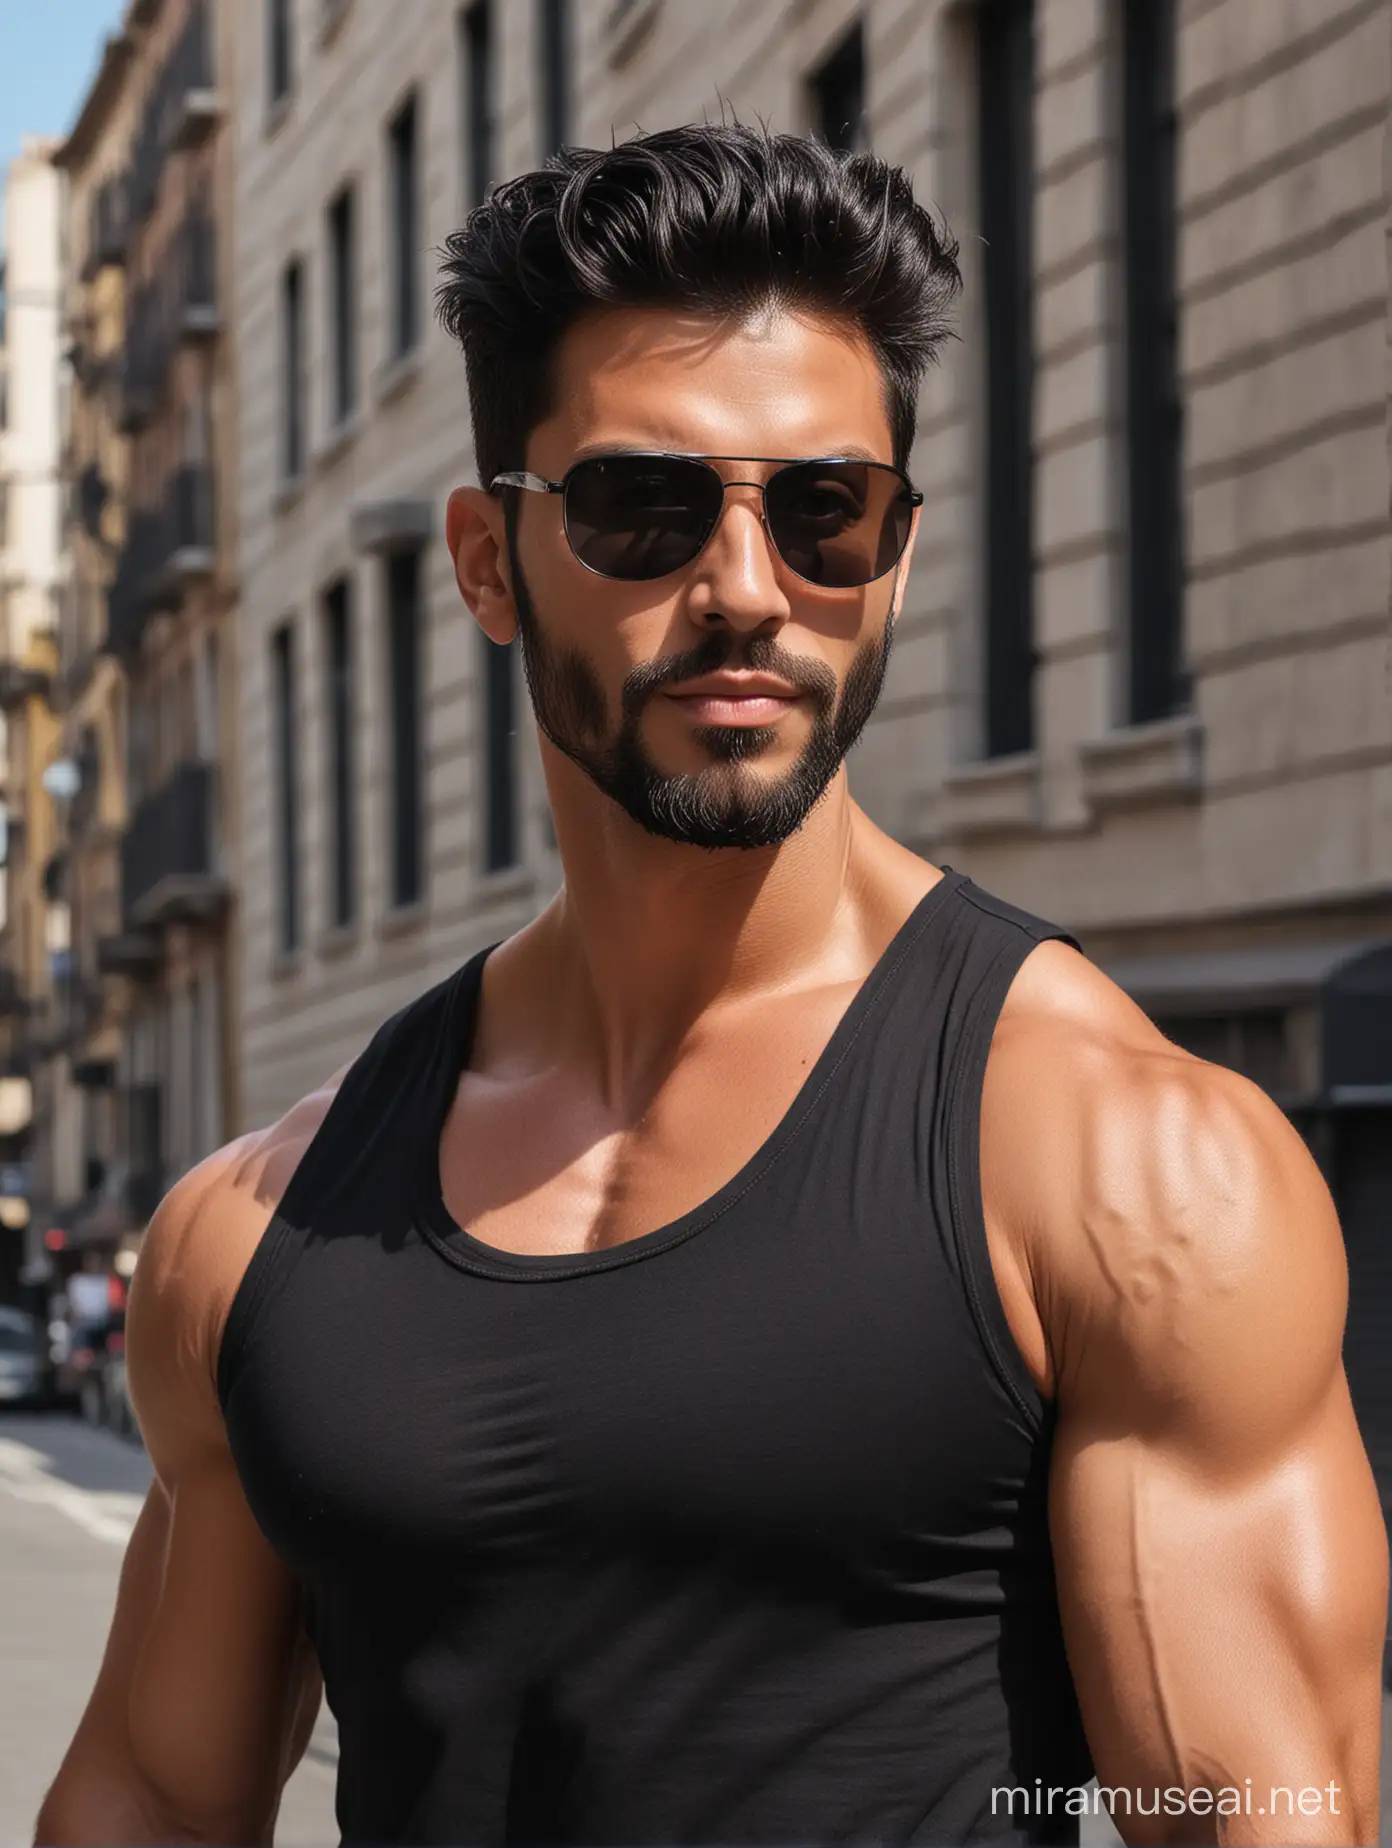 Tall and handsome muscular men with beautiful black hairstyle and beard with attractive eyes and broad shoulder and chest in black shirt with black sunglasses walking on street 